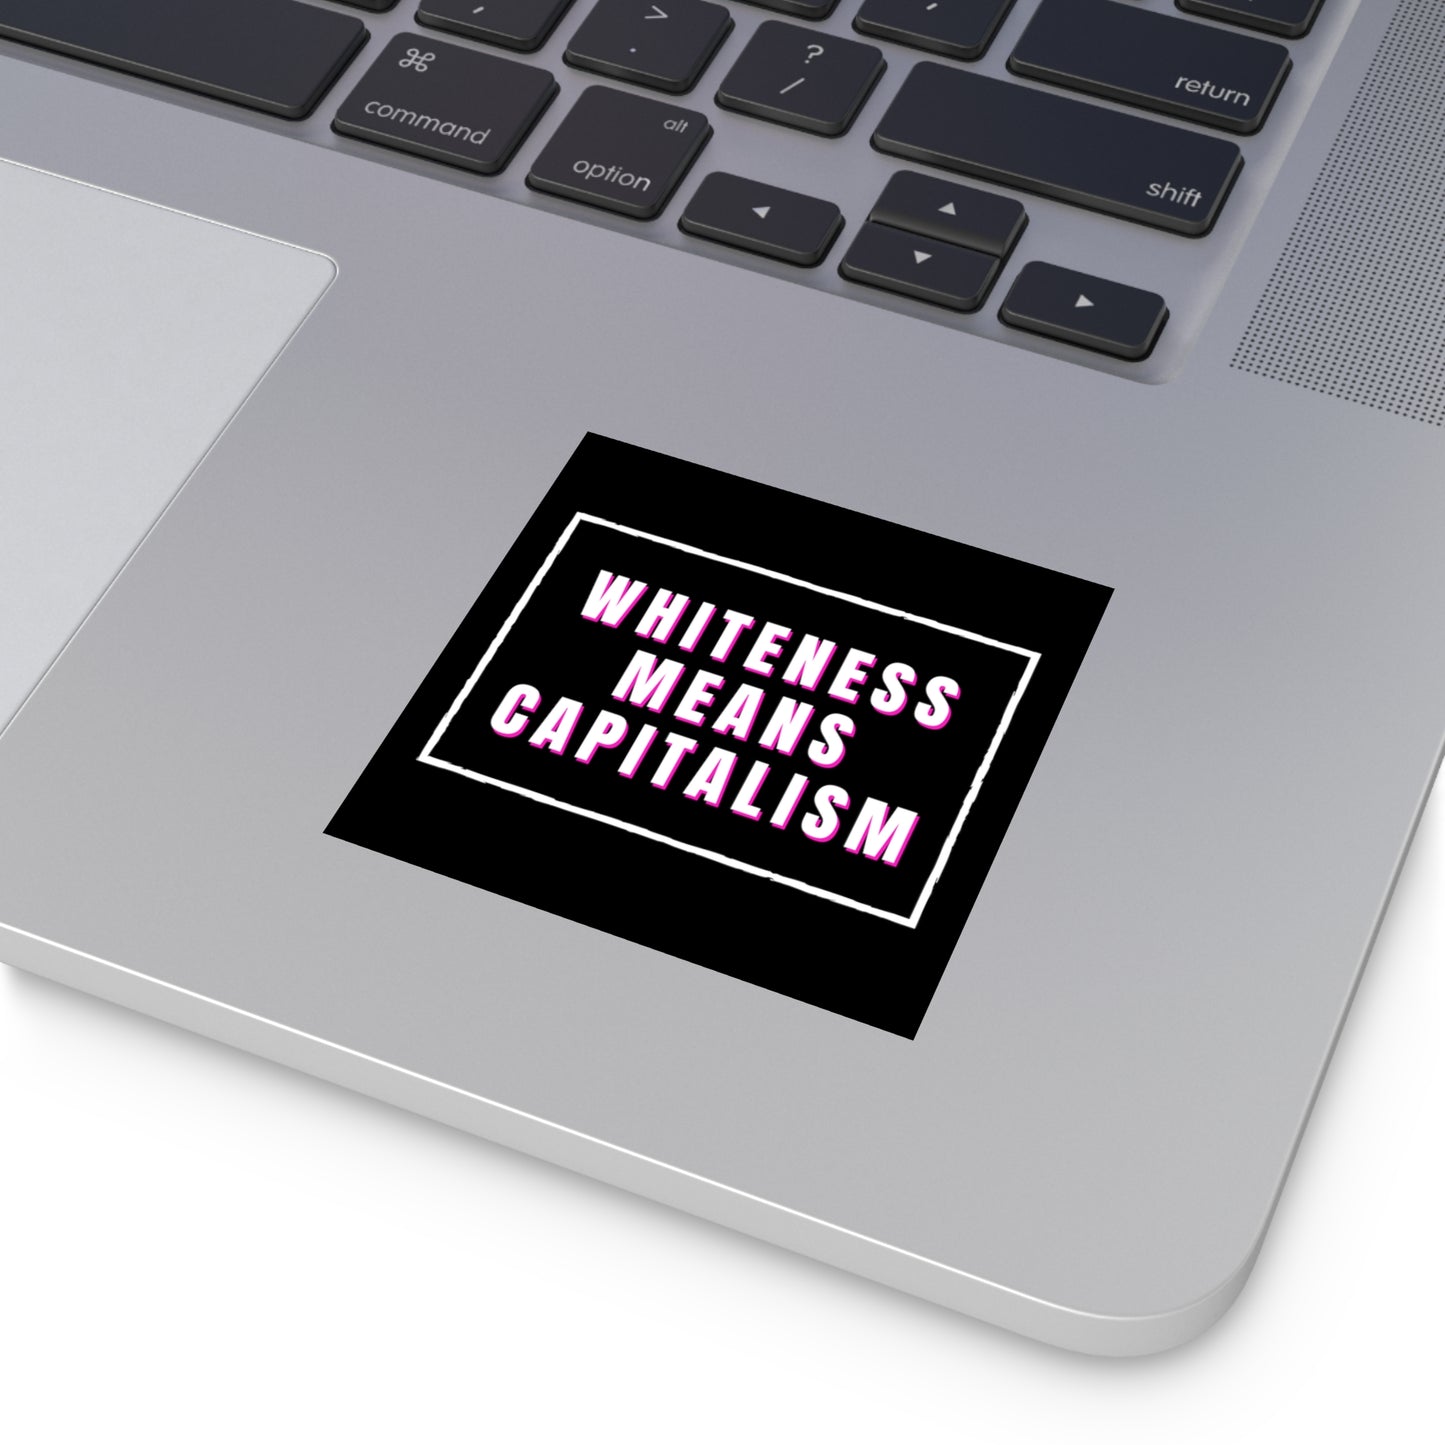 Whiteness is Capitalism Square Stickers, Indoor\Outdoor